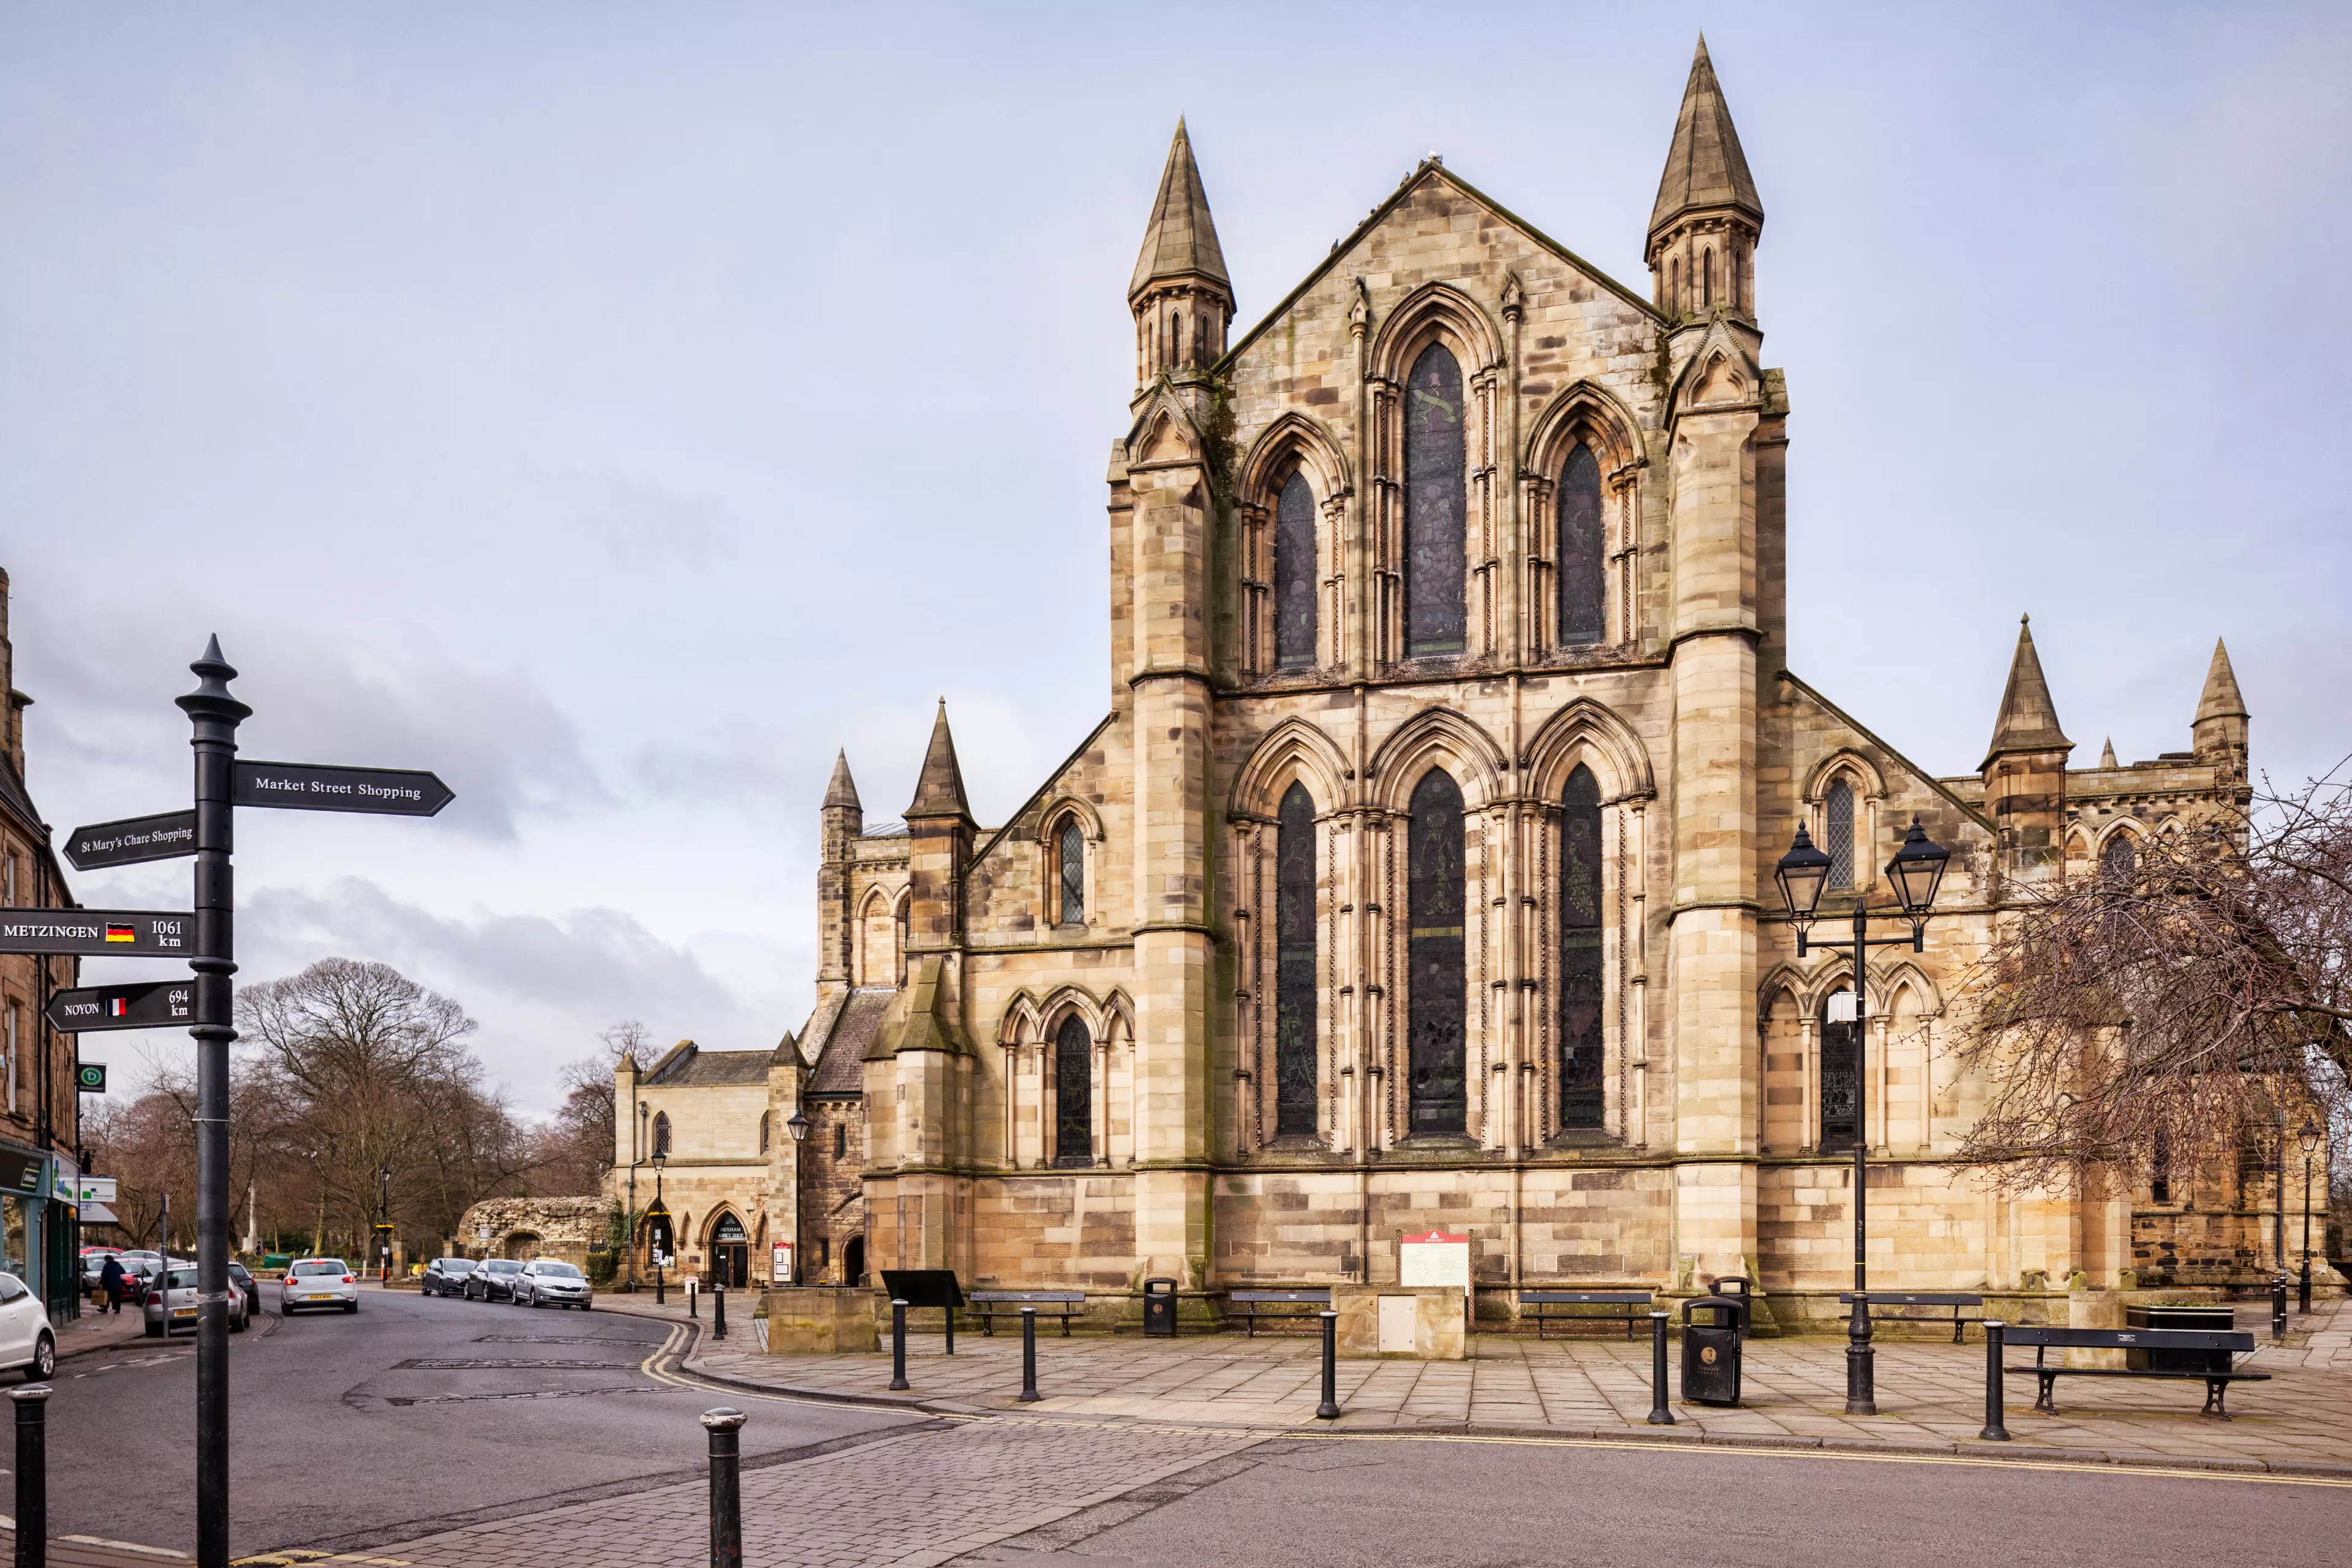 Hexham in Northumberland has been named as the happiest place to live in Britain.